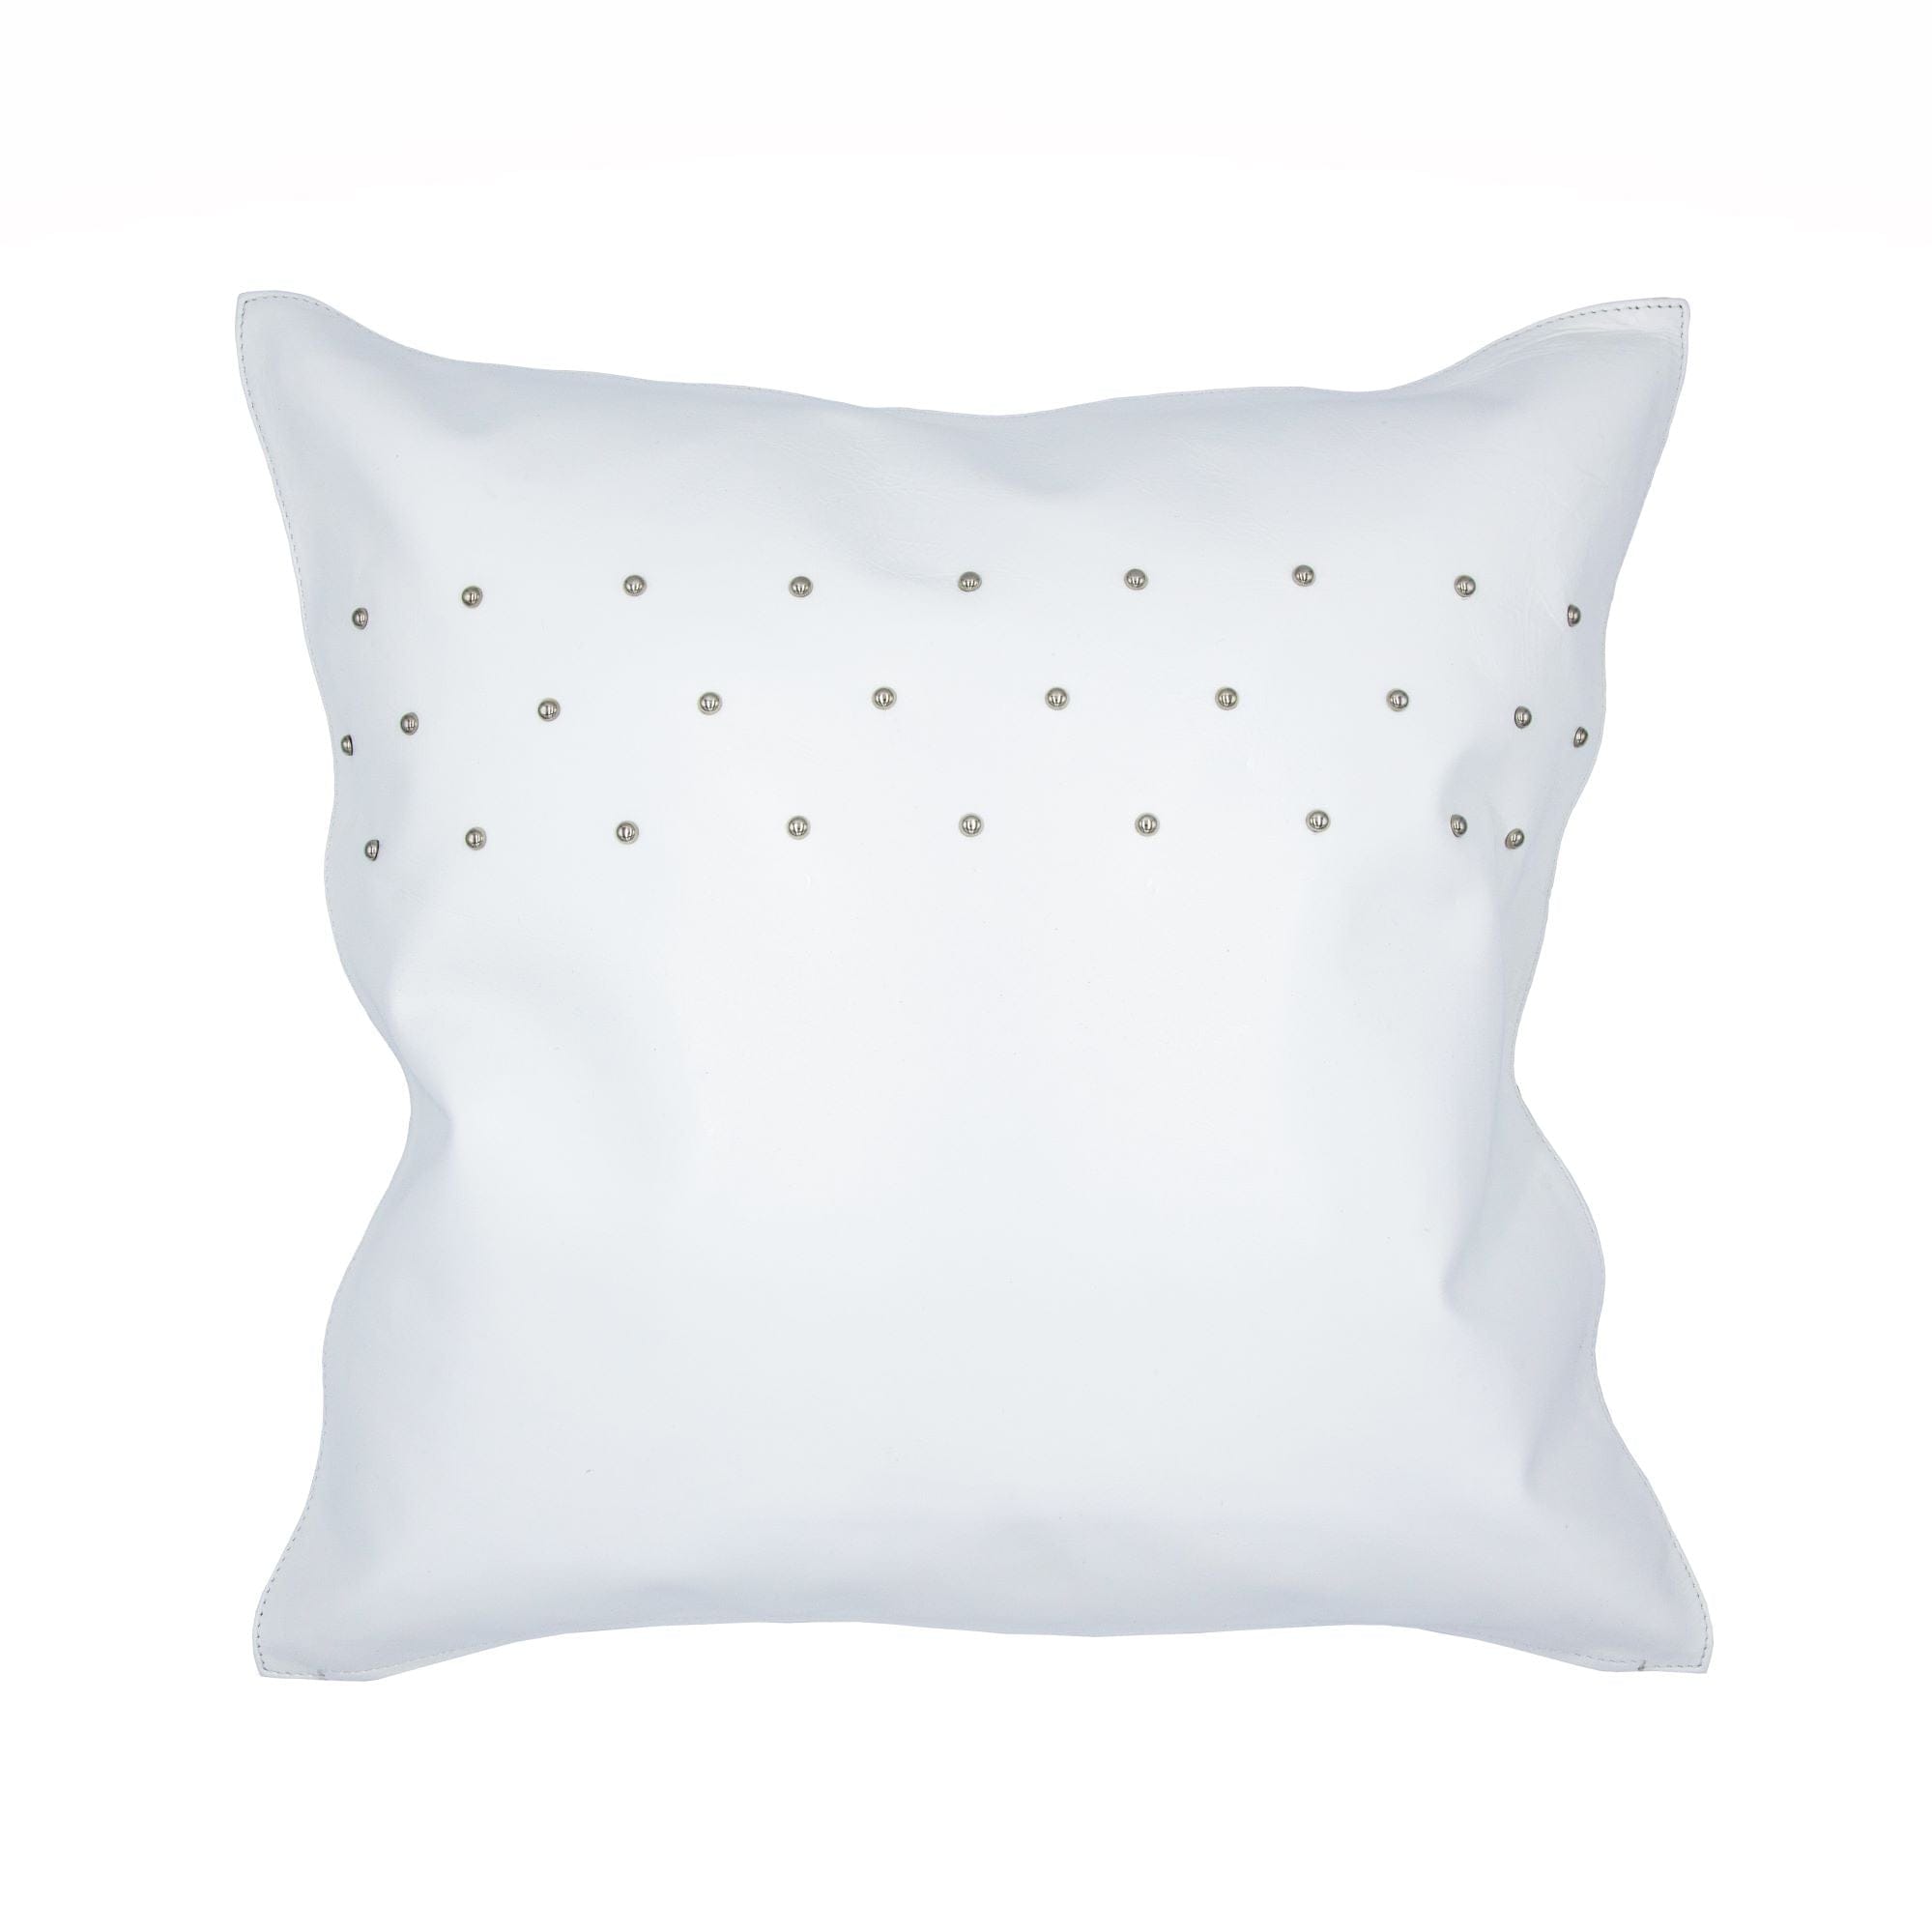 HiEnd Accents Genuine White Leather Studded Throw Pillow, 20 20